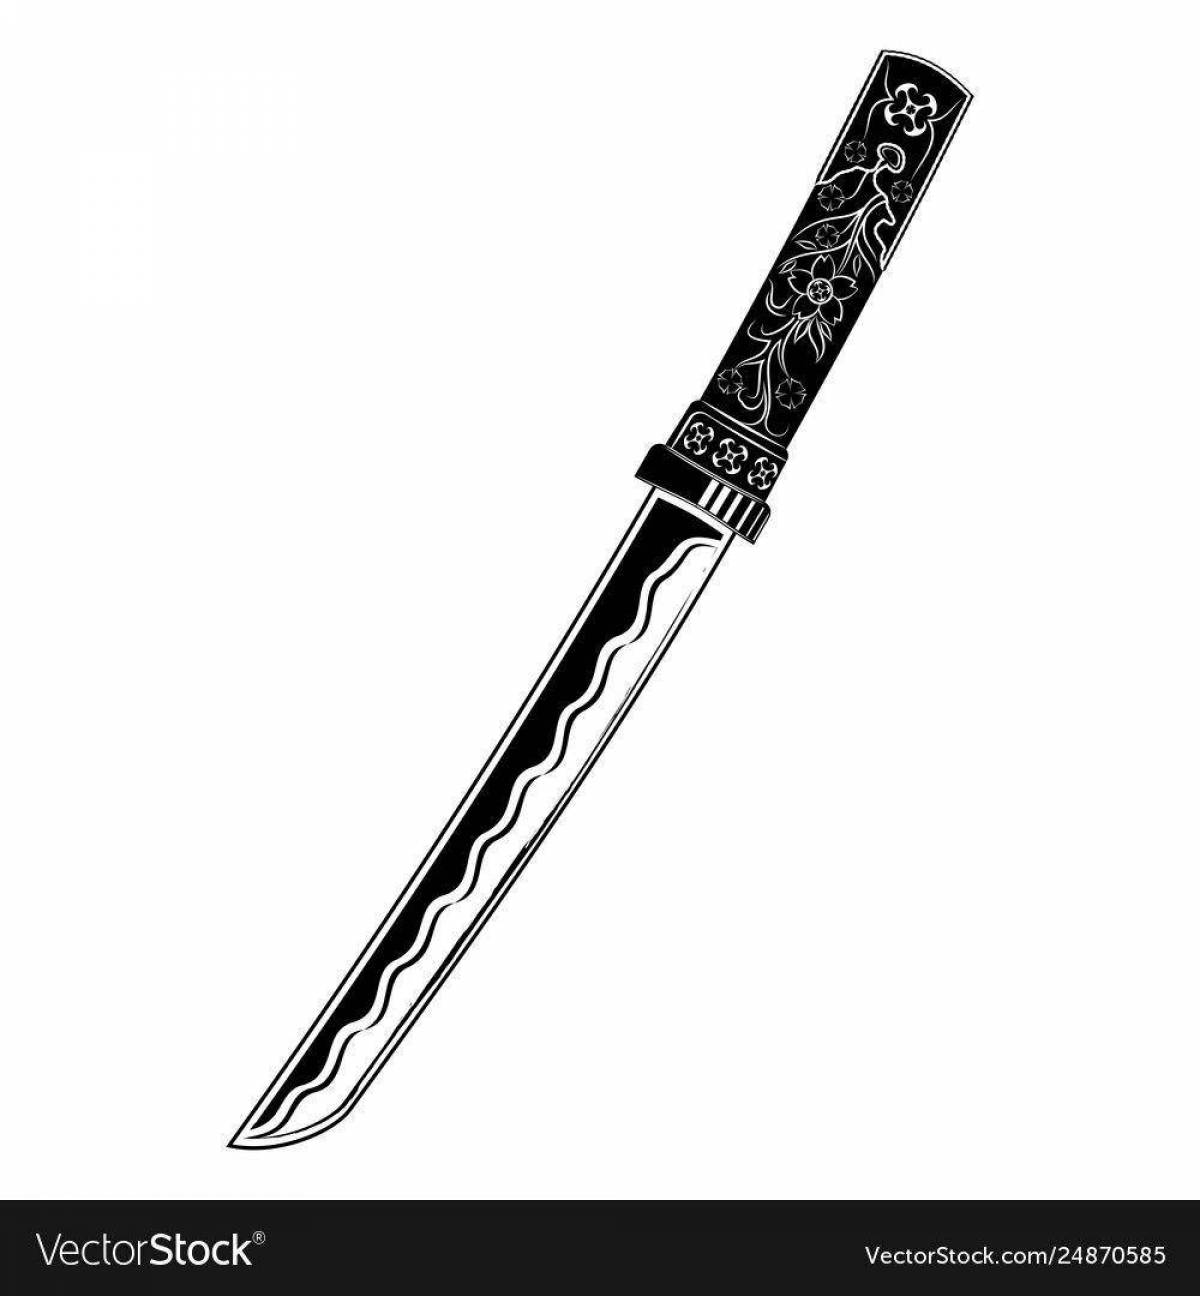 Attractive tanto knife coloring page